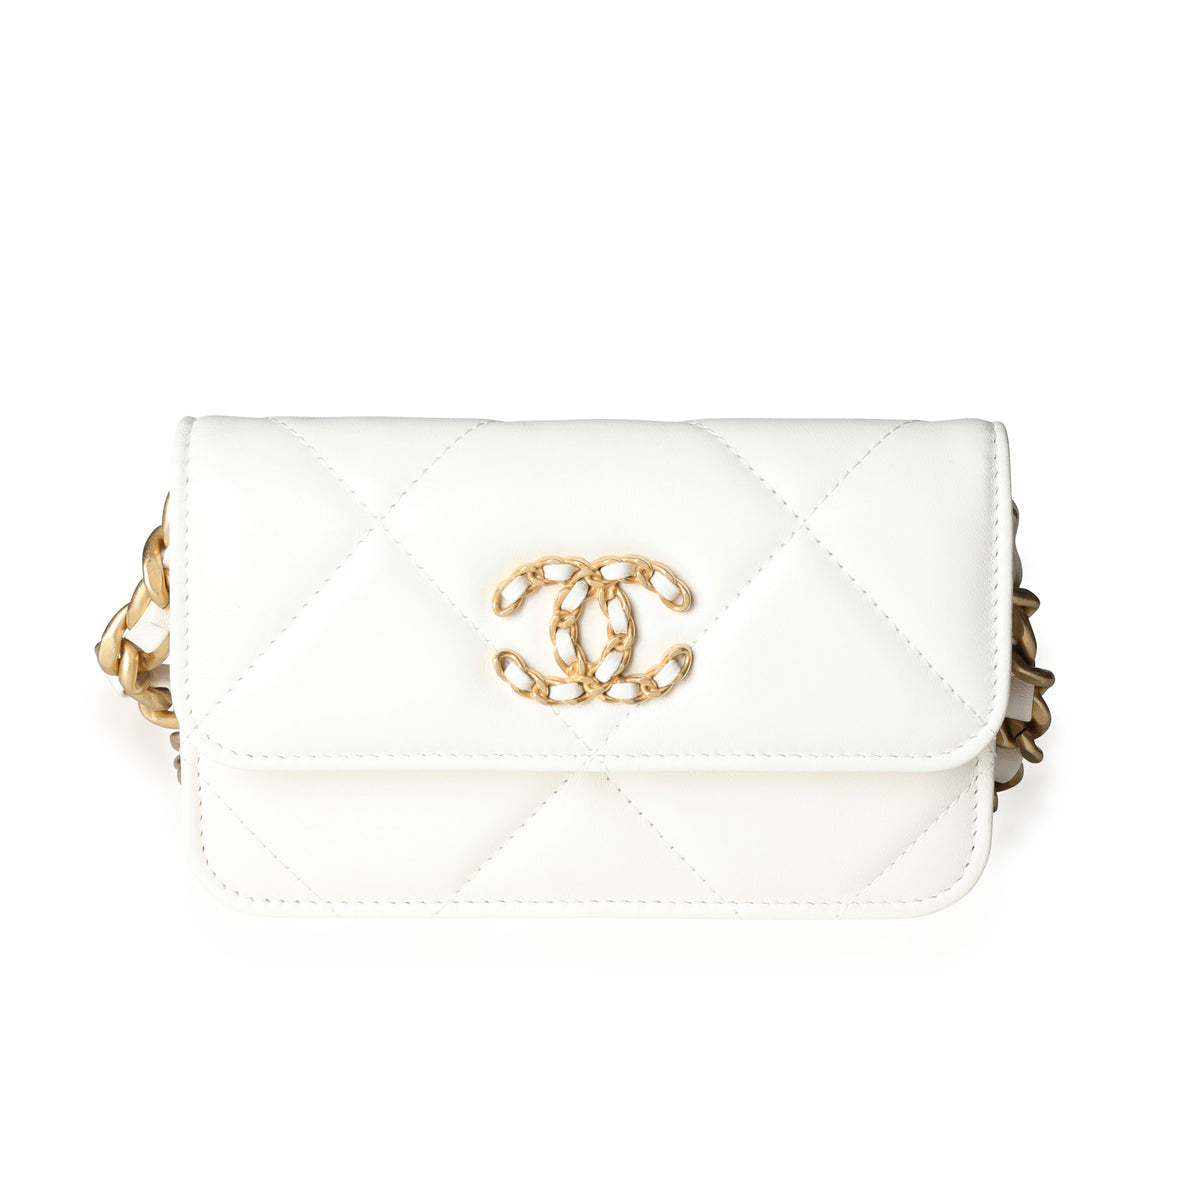 Chanel White Quilted Lambskin Chanel 19 Mini Flap Bag, myGemma, SG